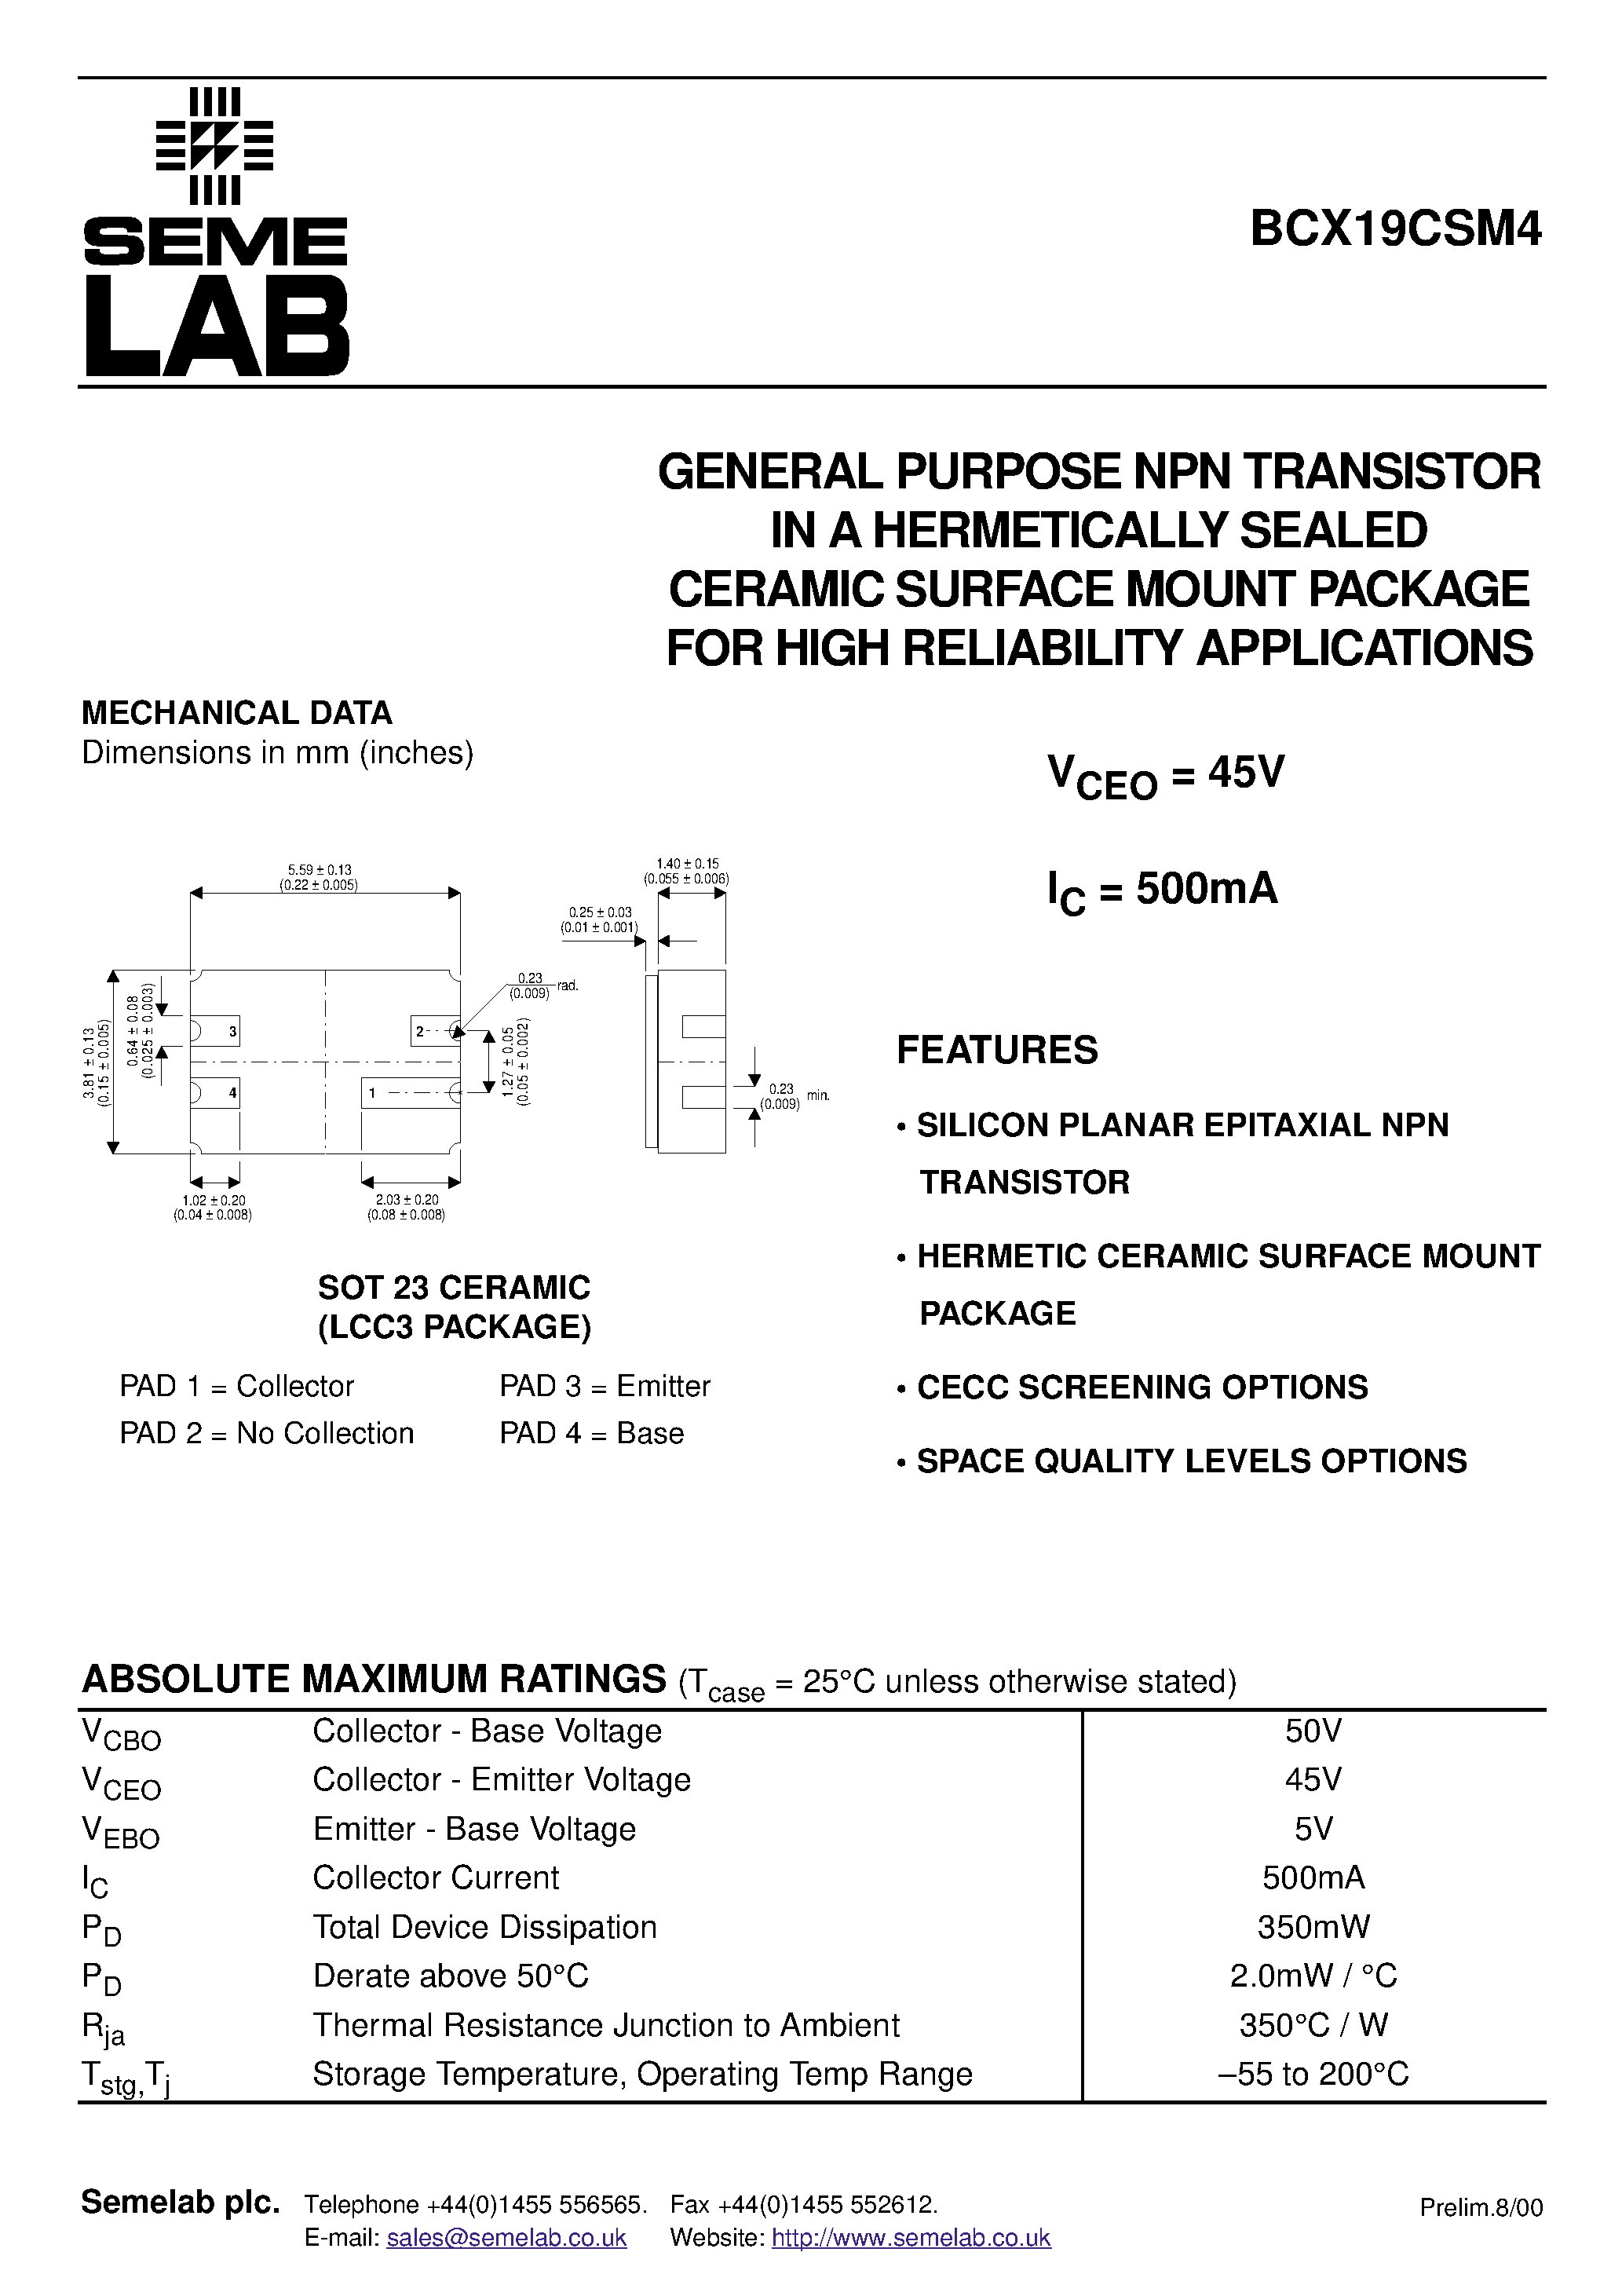 Datasheet BCX19CSM4 - GENERAL PURPOSE NPN TRANSISTOR IN A HERMETICALLY SEALED CERAMIC SURFACE MOUNT PACKAGE FOR HIGH RELIABILITY APPLICATIONS page 1